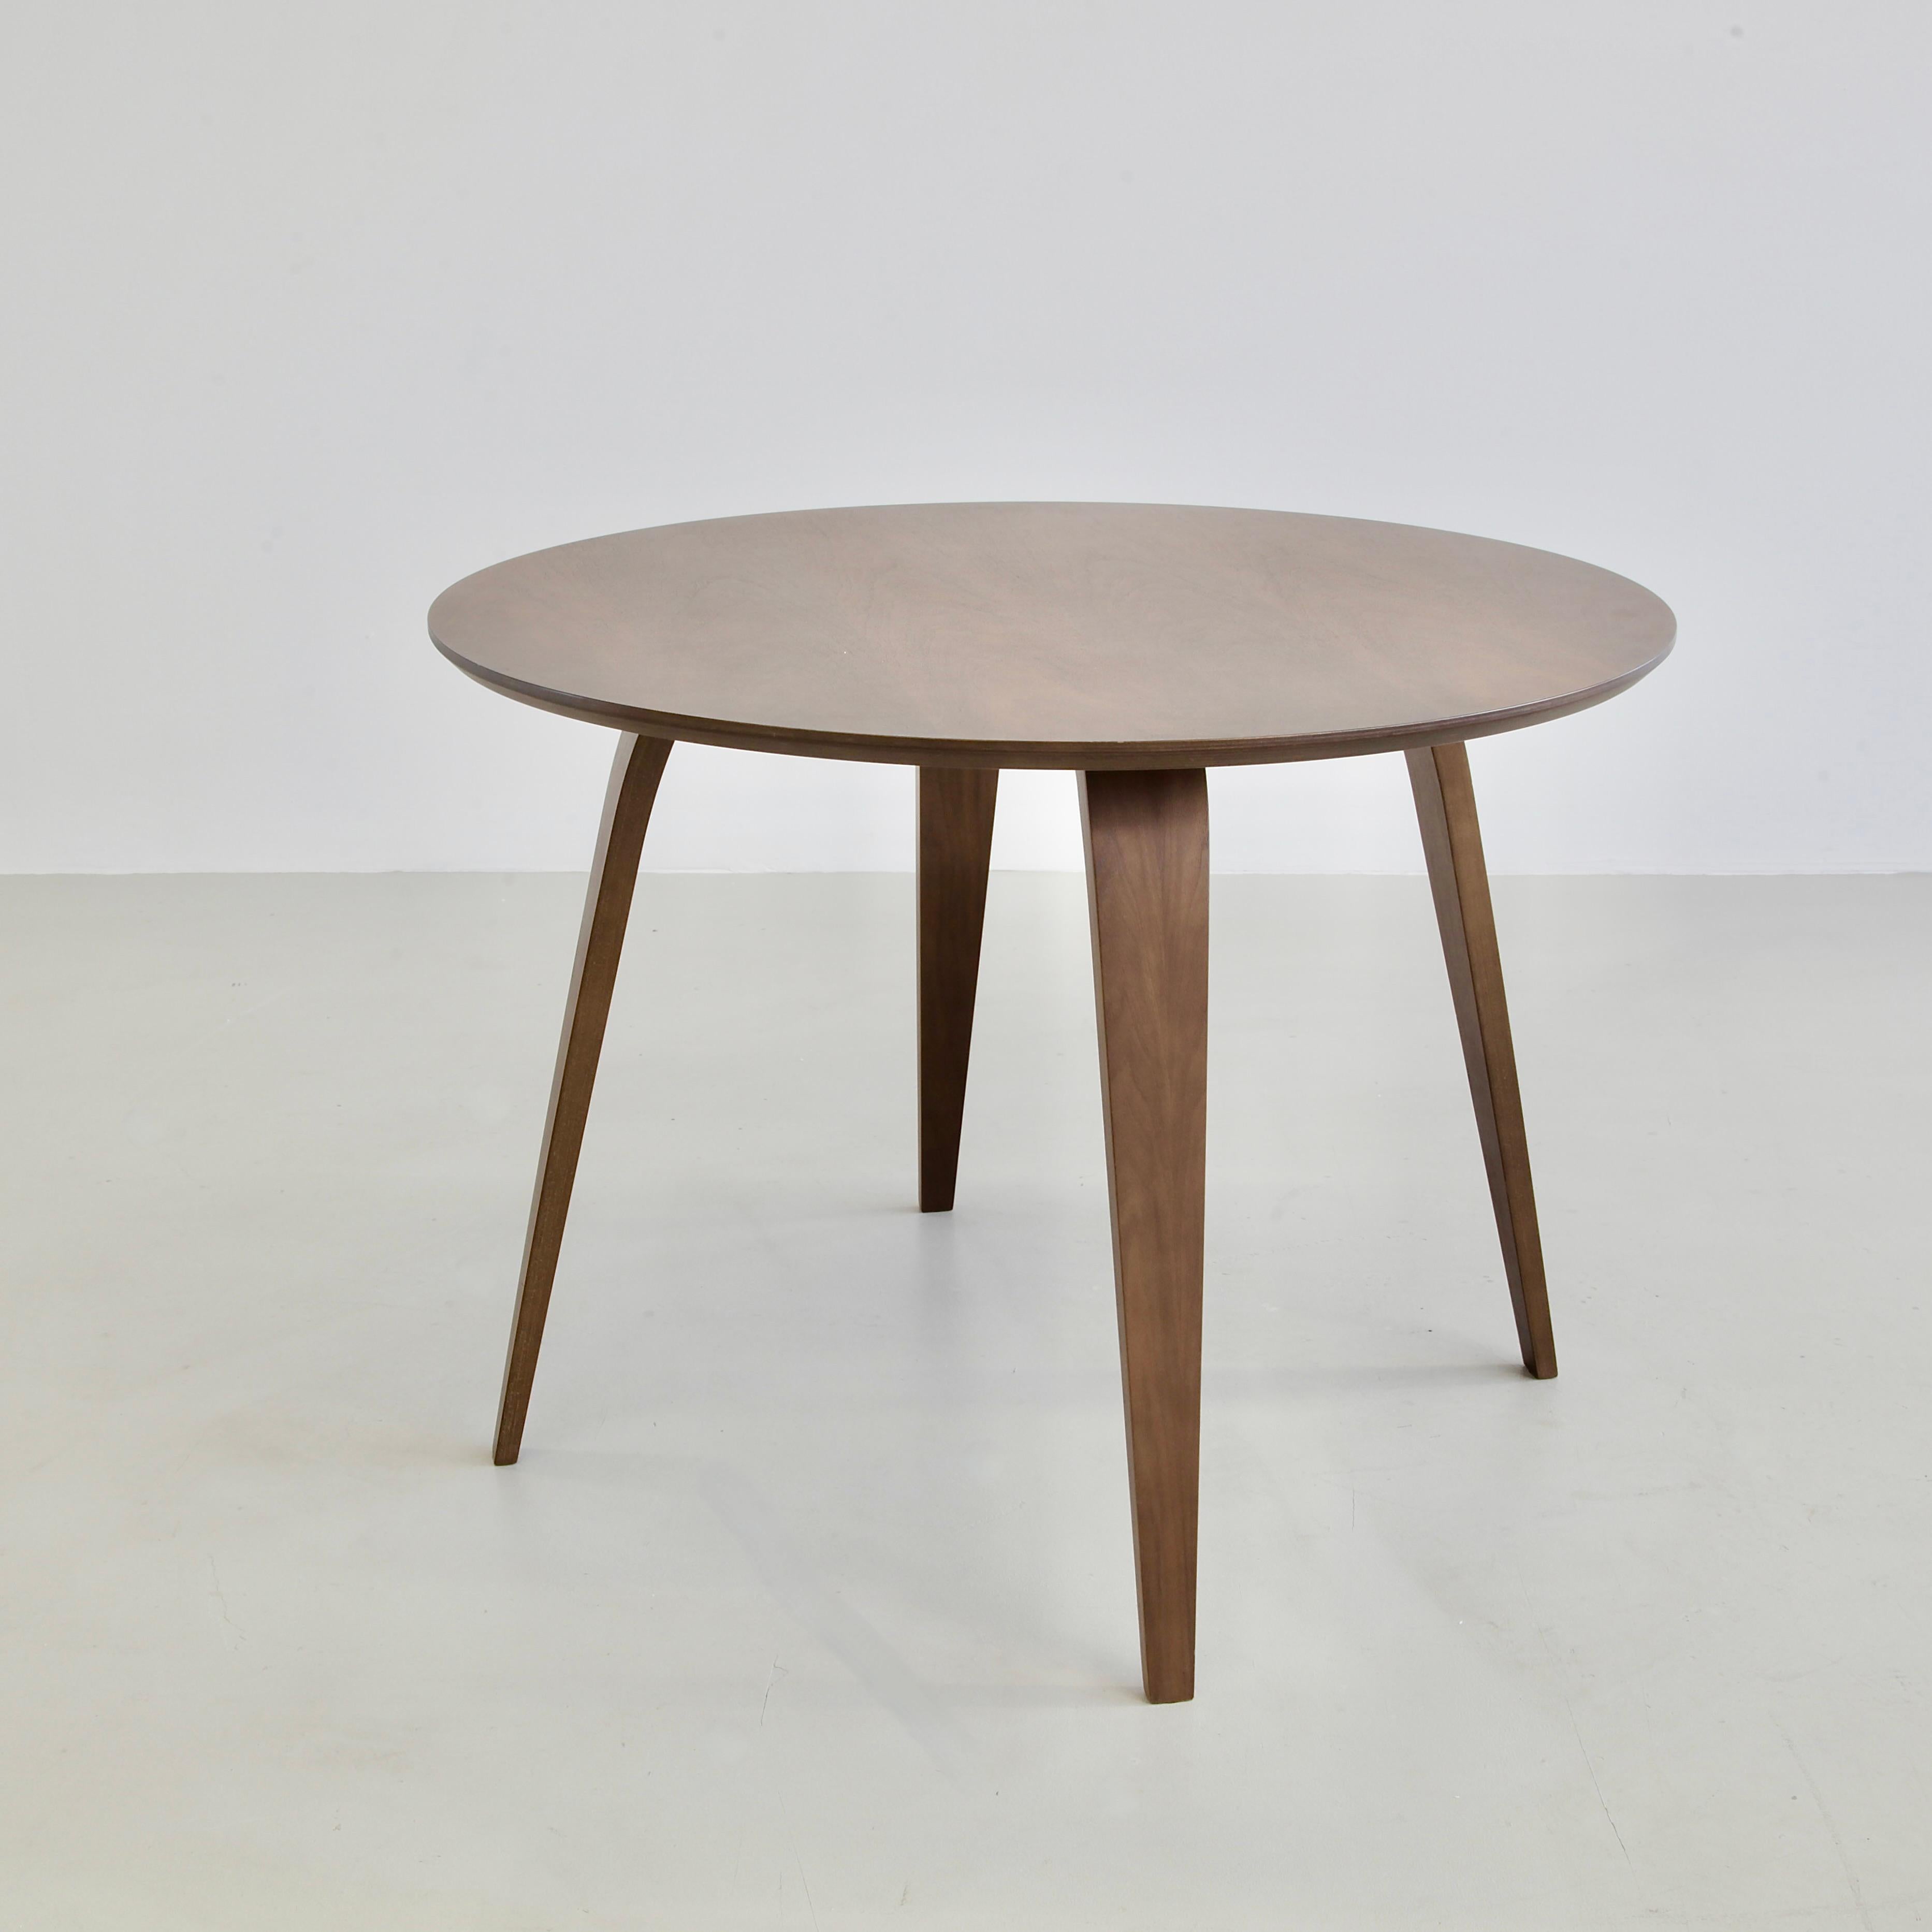 Walnut Dining Table 2615 'Round' by Benjamin Cherner, 2003 For Sale